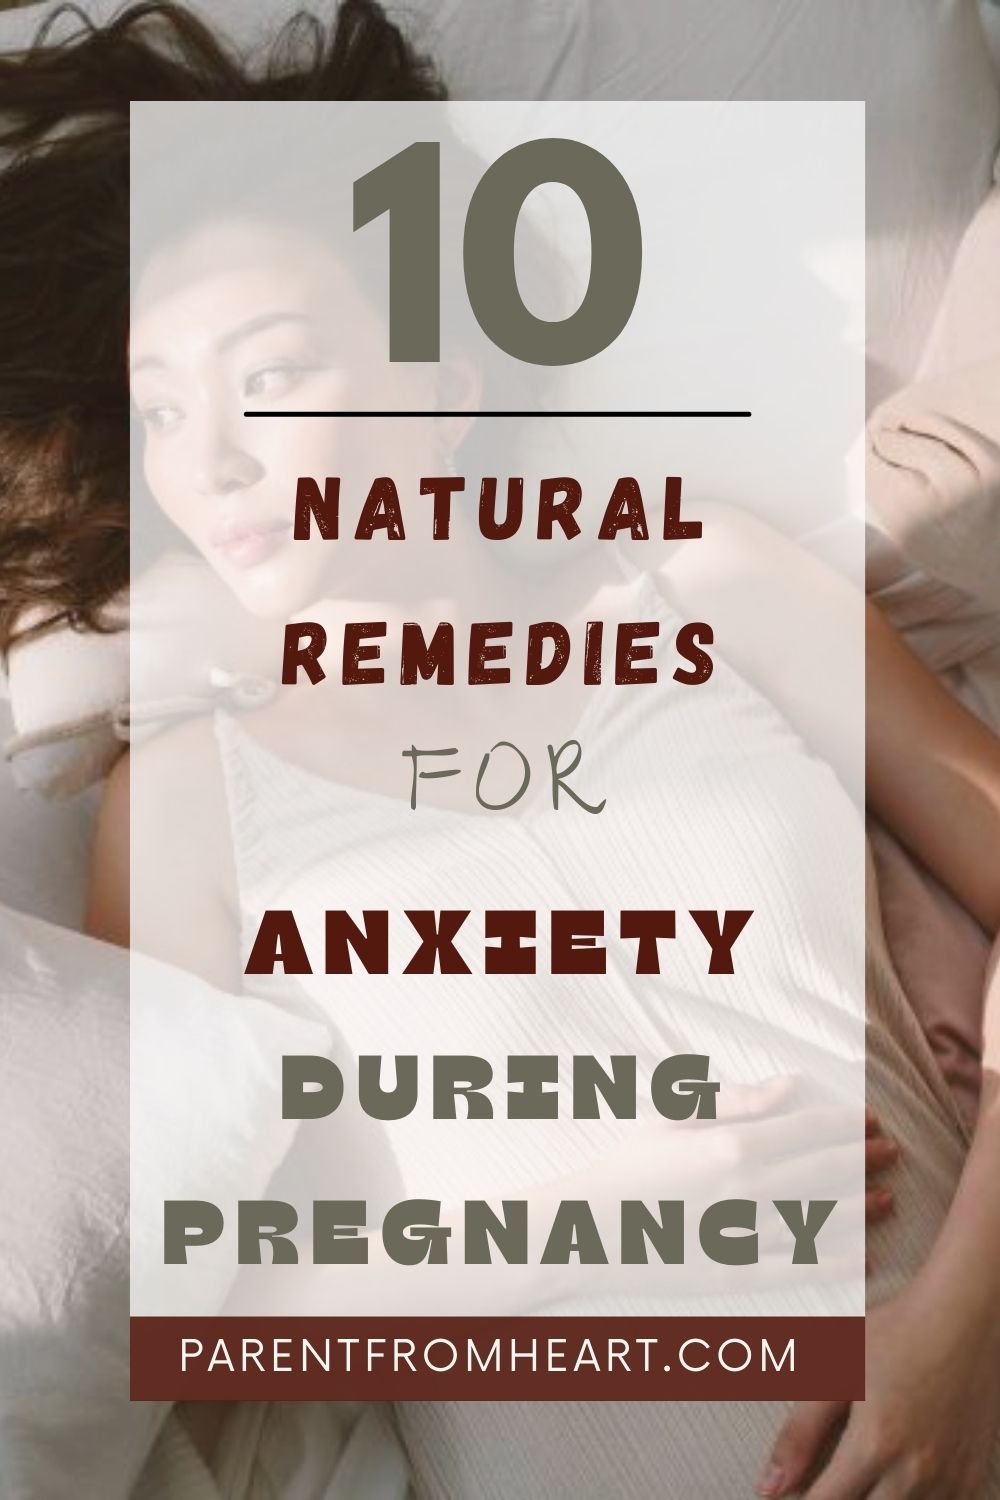 10 Natural Remedies for Anxiety During Pregnancy